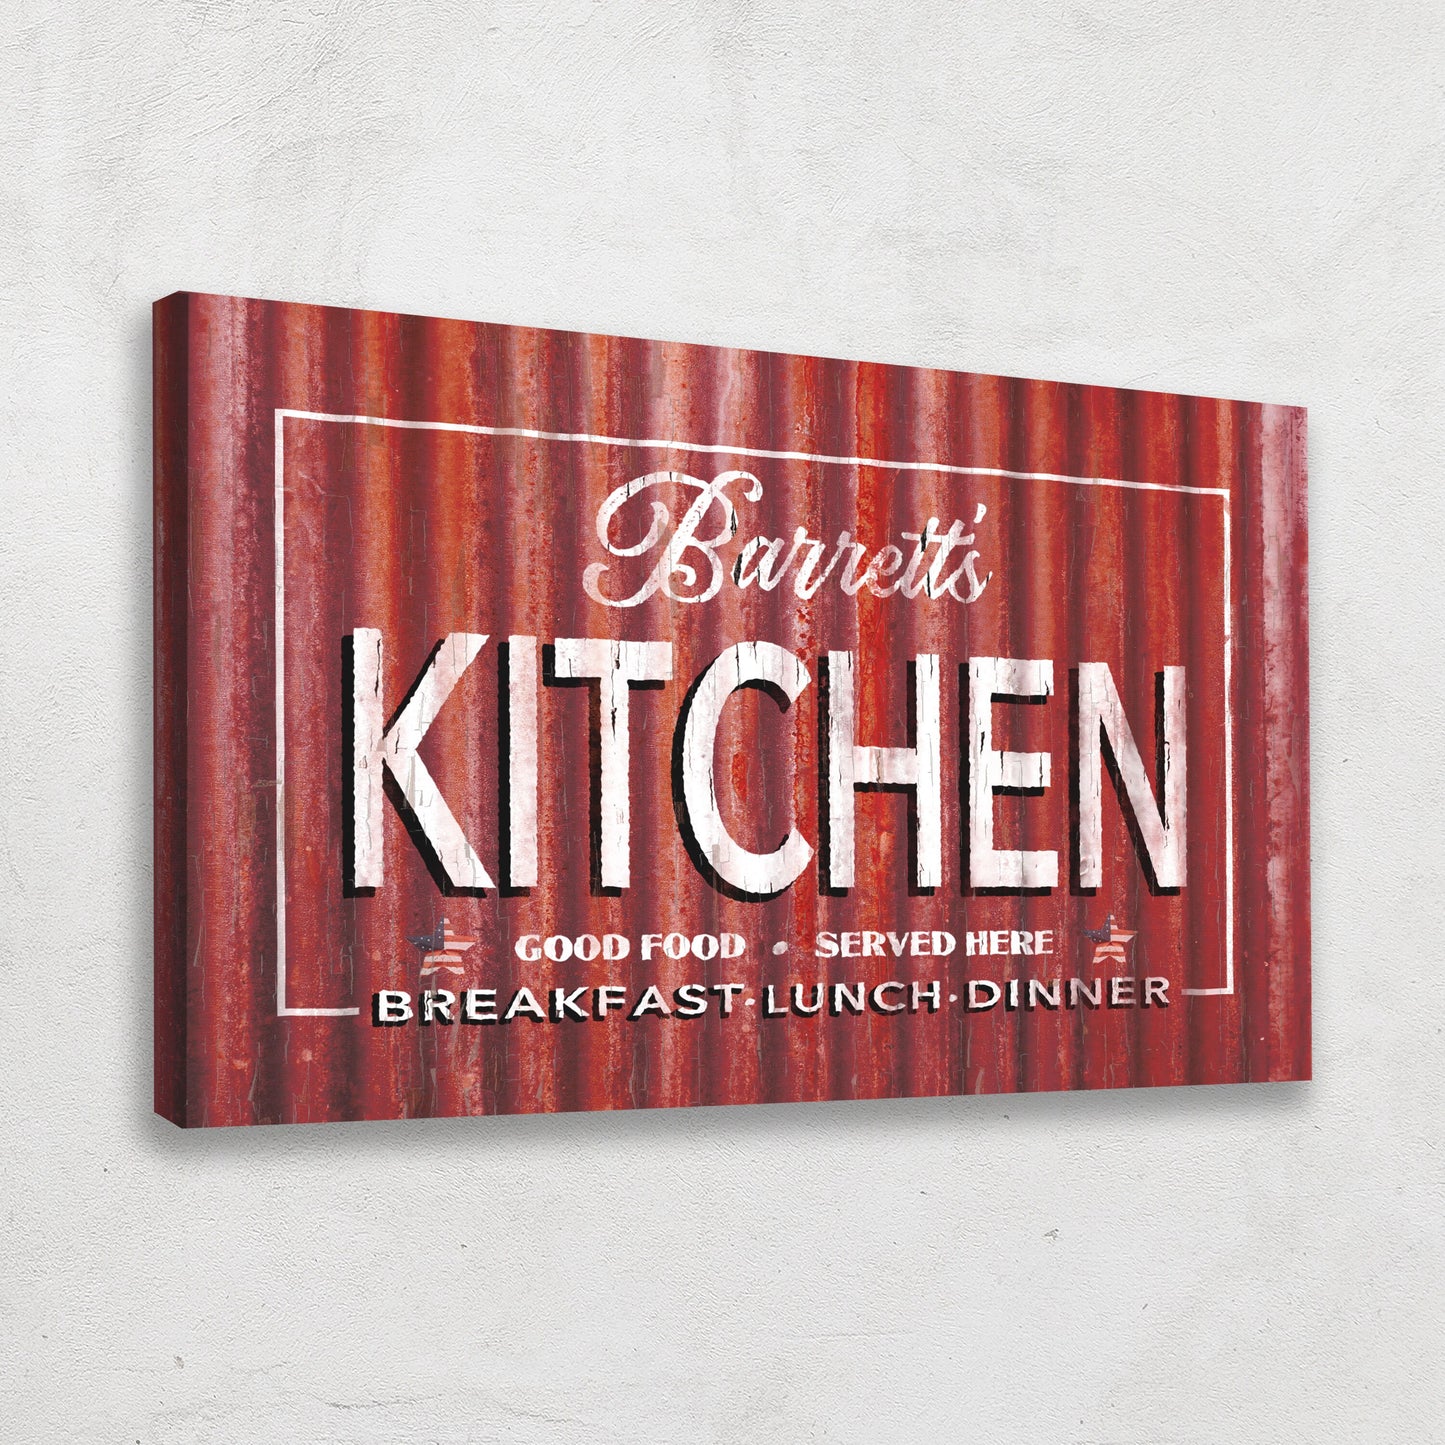 Personalized Tin Kitchen Signs Vintage Rustic Metal Look Canvas Wall Decor Last Name Established Antique Farmhouse Art Country Kitchen Gift